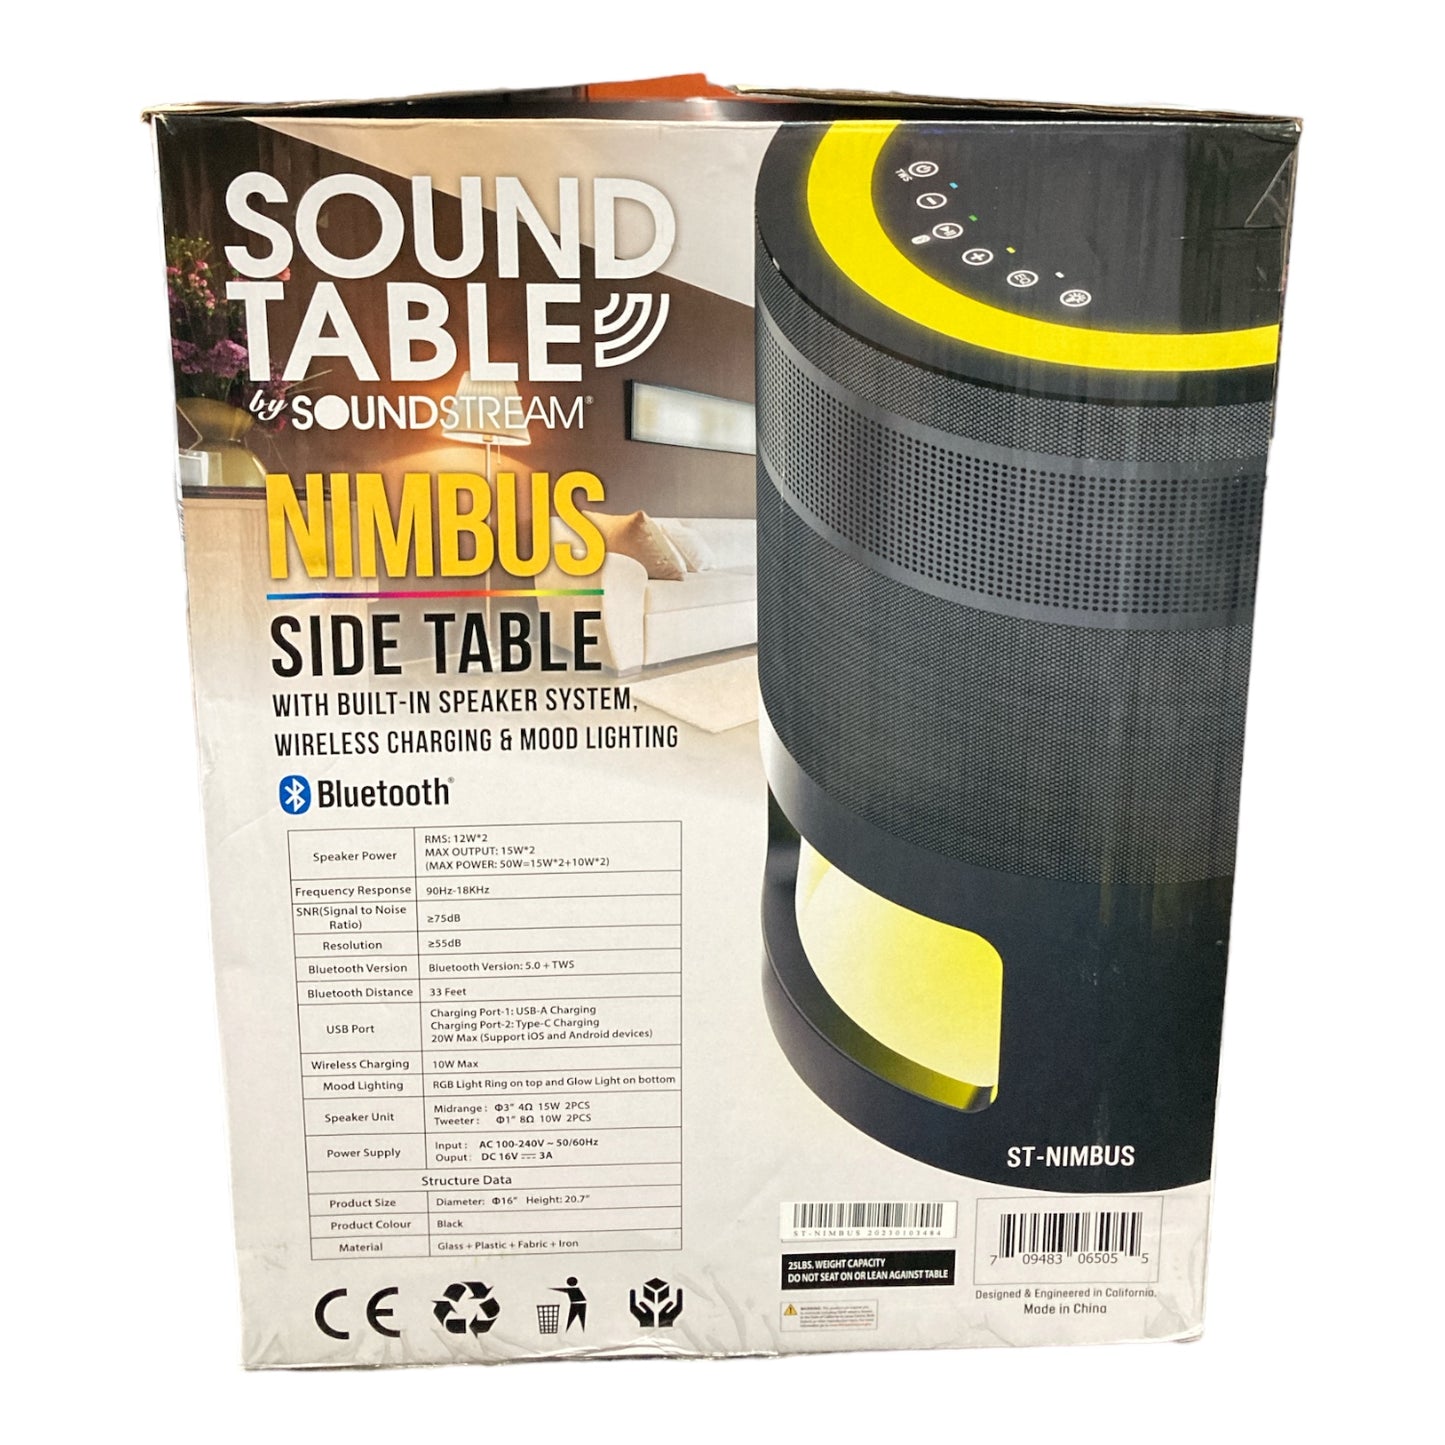 Soundstream Nimbus Sound Table Bluetooth Speaker, Side Table, Wireless Charging